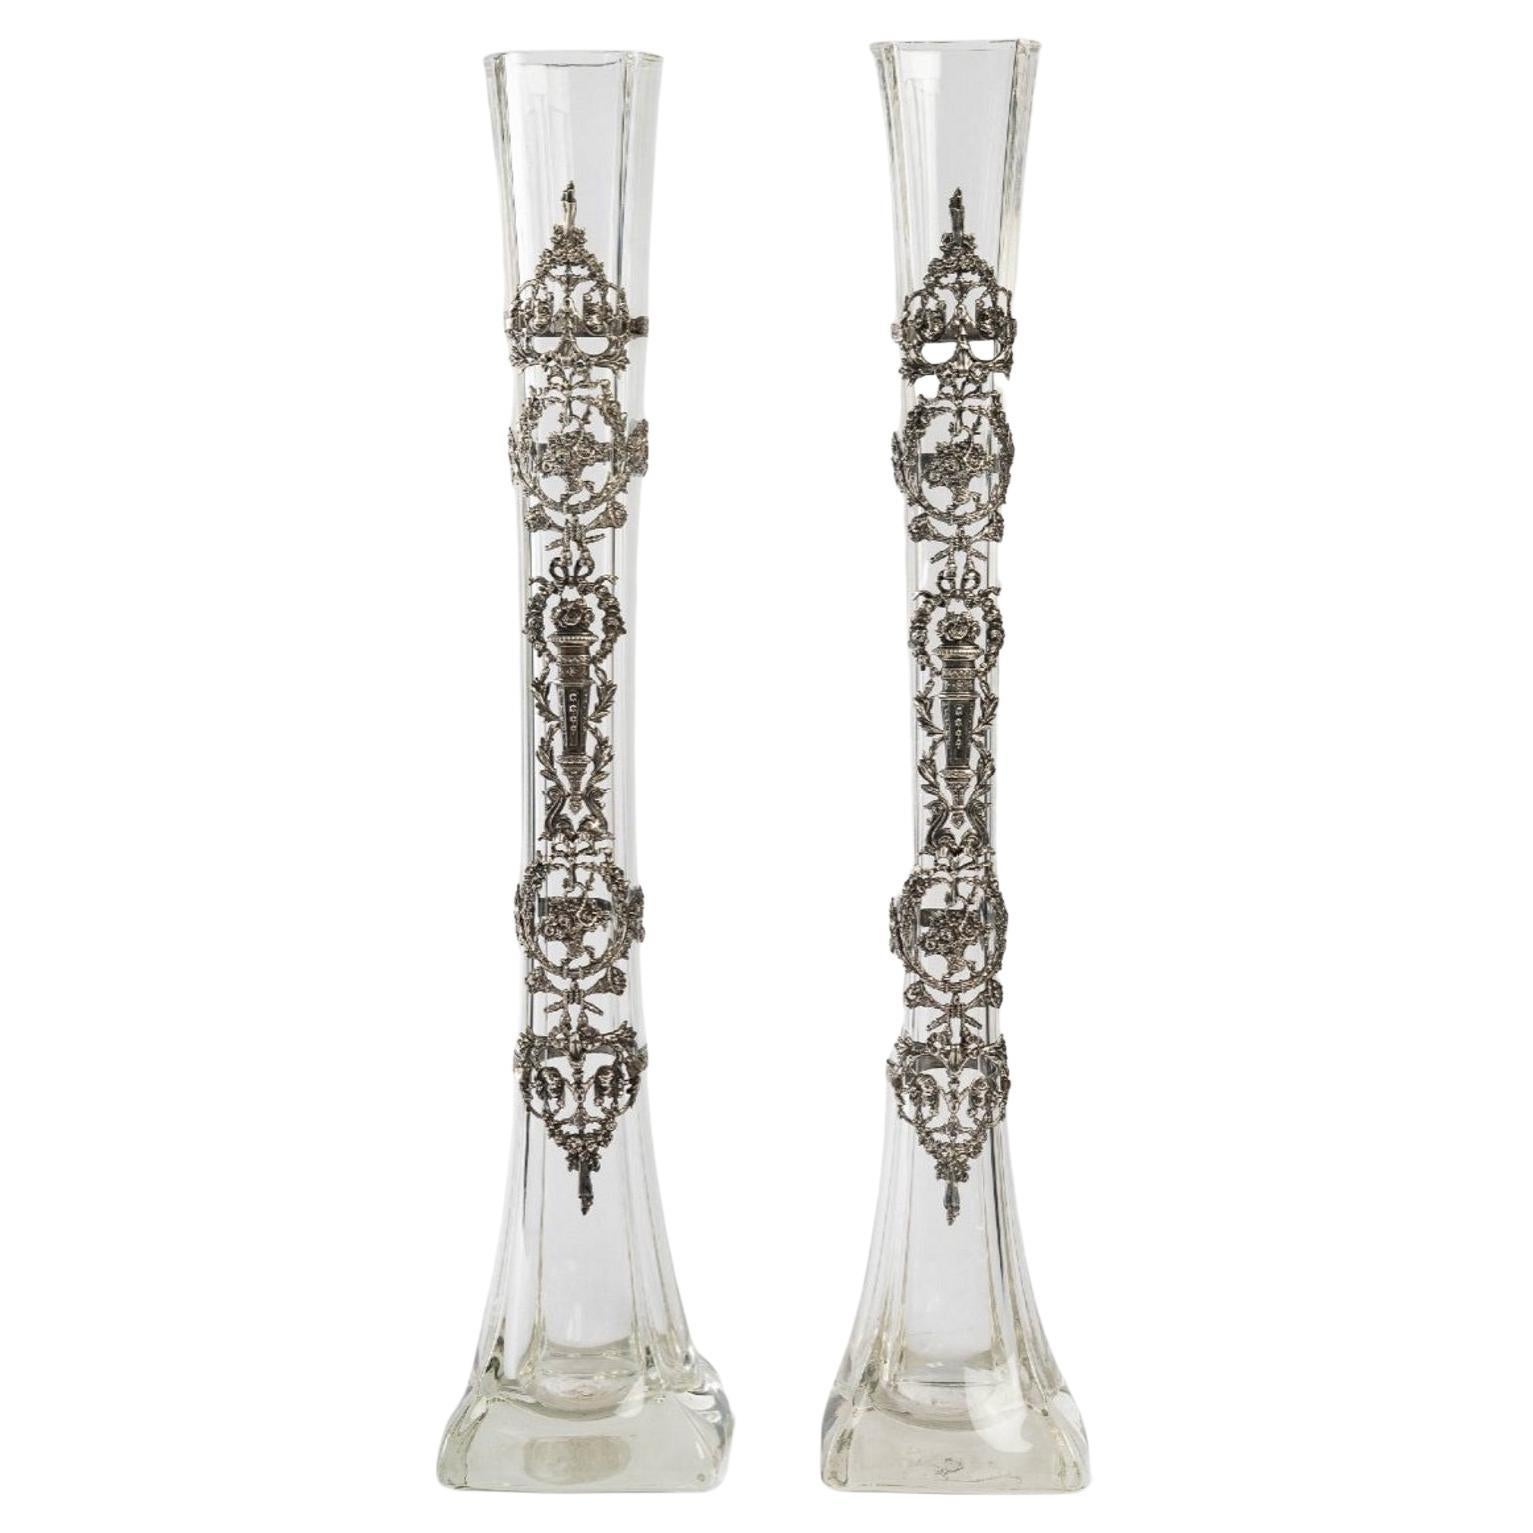 Pair of Crystal Vases with Silver Decoration